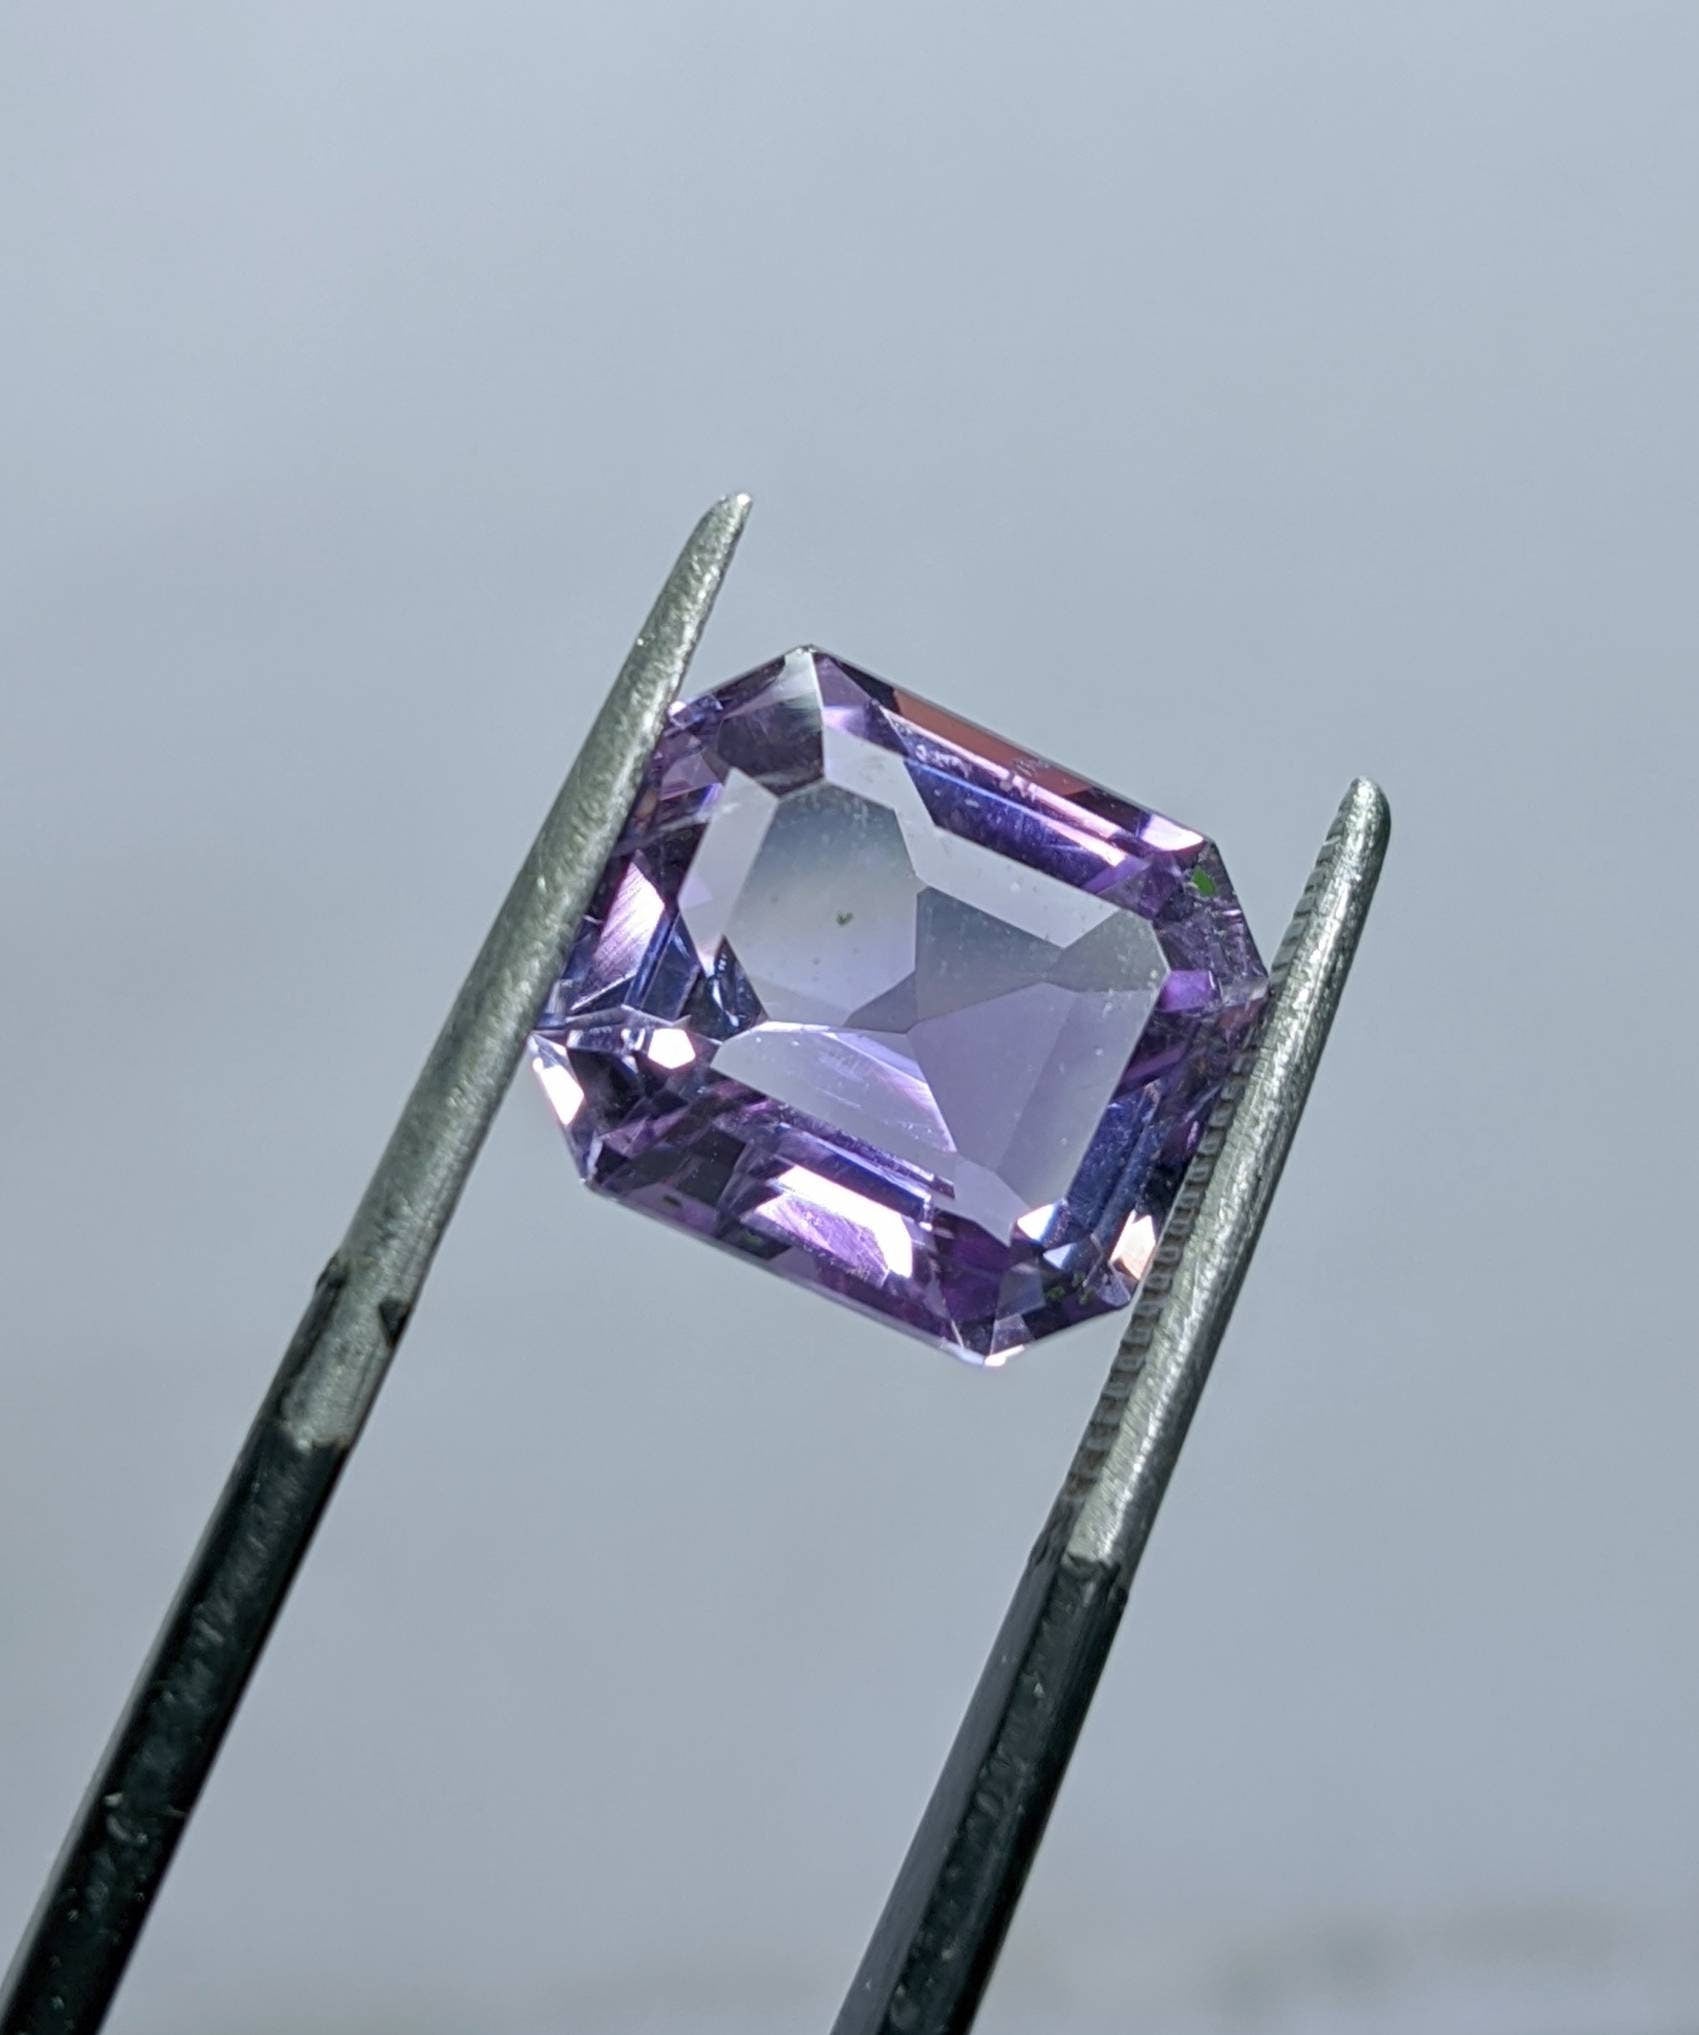 ARSAA GEMS AND MINERALSNatural fine quality beautiful 5 carats light purple color clear faceted amethyst gem - Premium  from ARSAA GEMS AND MINERALS - Just $8.00! Shop now at ARSAA GEMS AND MINERALS